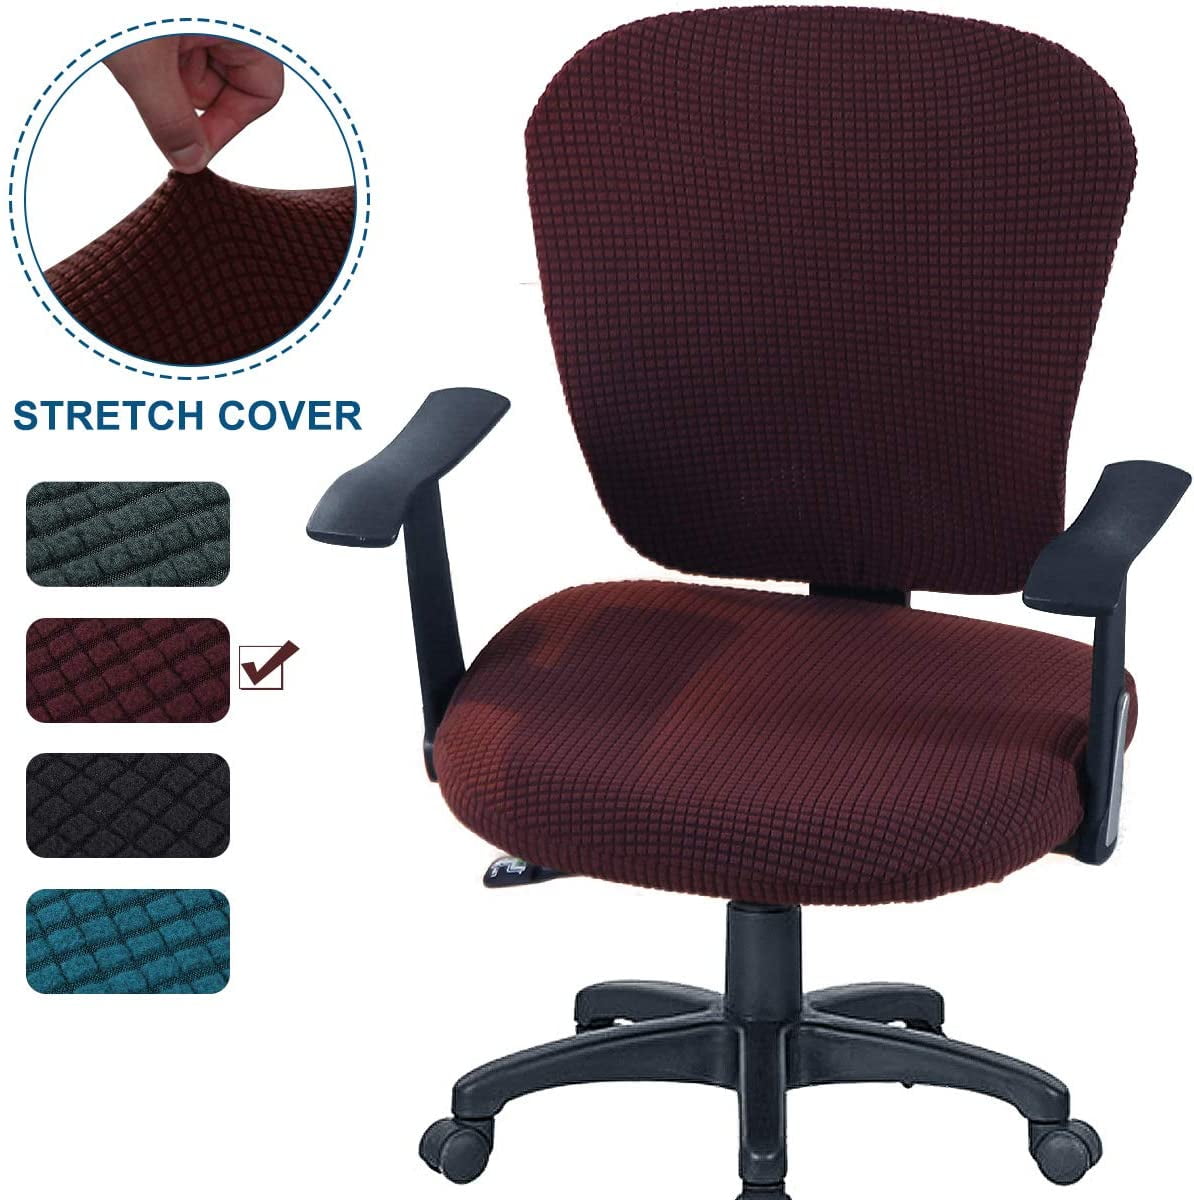 2Pcs Floral Office Computer Chair Cover Swivel Rotate Seat Slipcover #4 